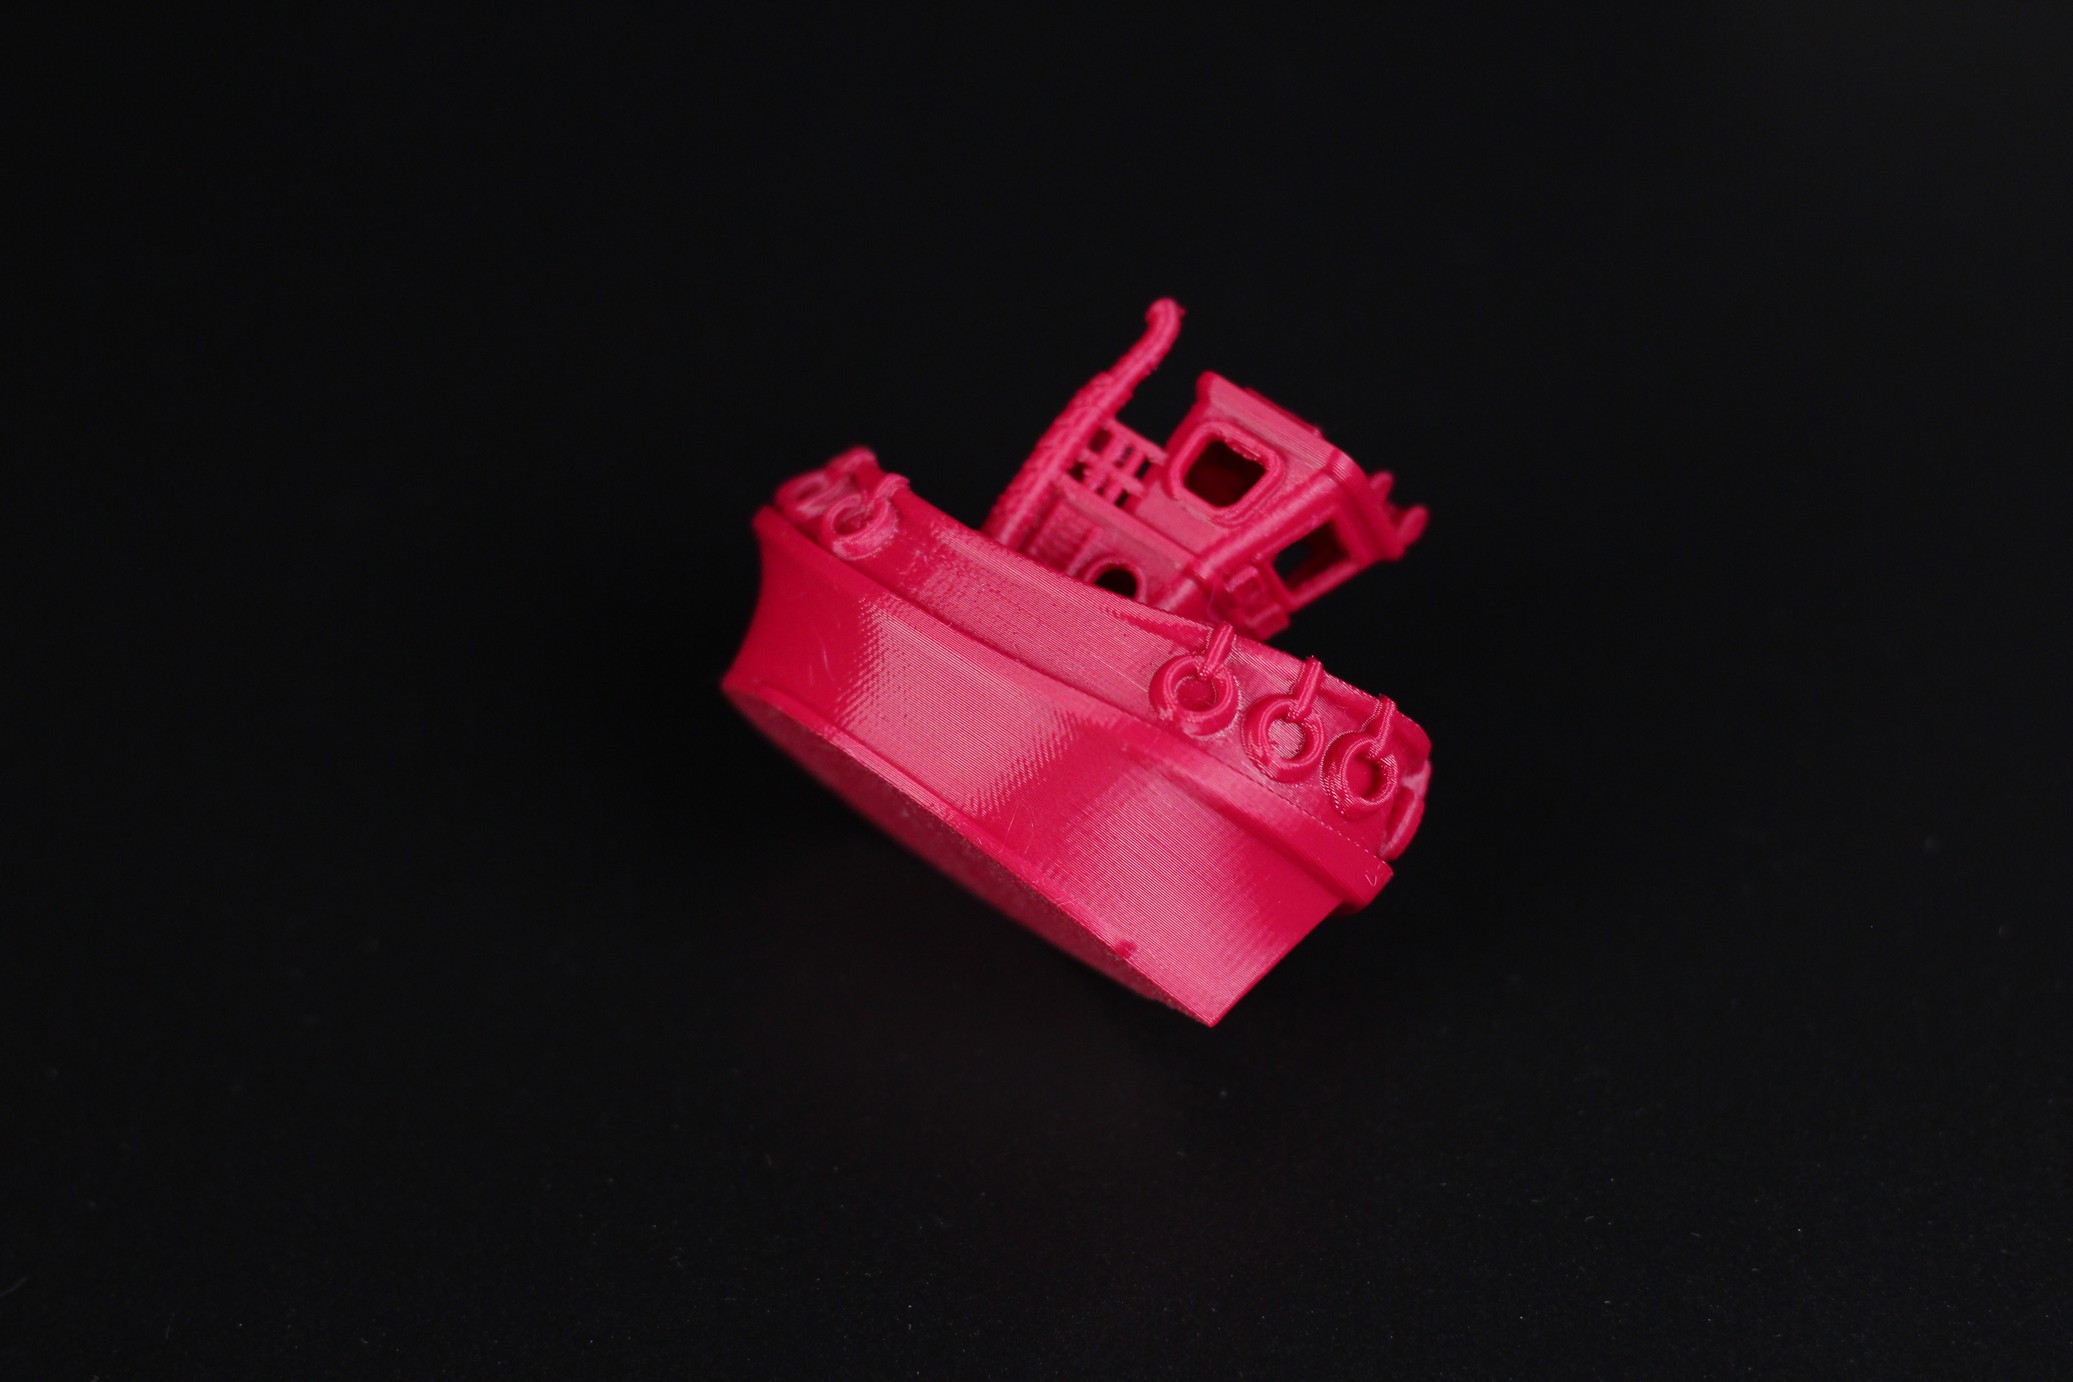 PETG Tubboat printed on Anycubic Kobra 2 | Anycubic Kobra Review: The New Budget Standard